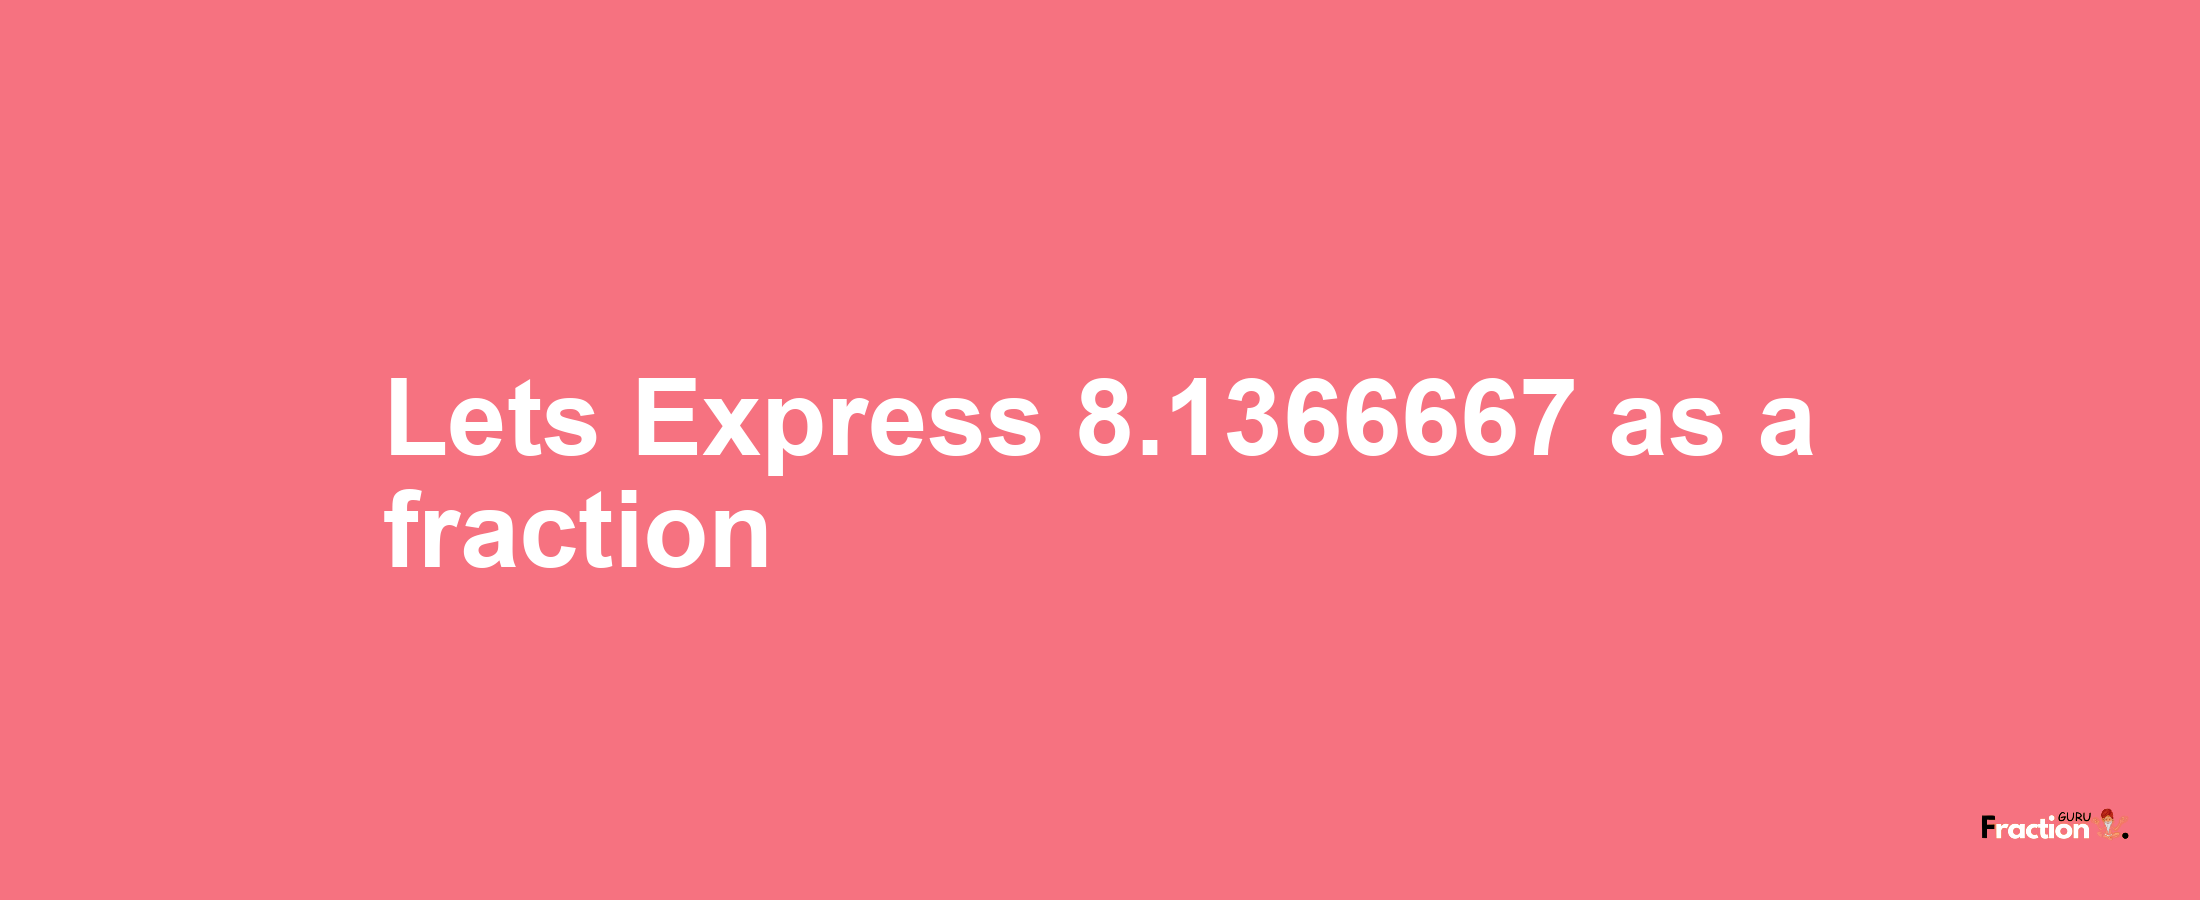 Lets Express 8.1366667 as afraction